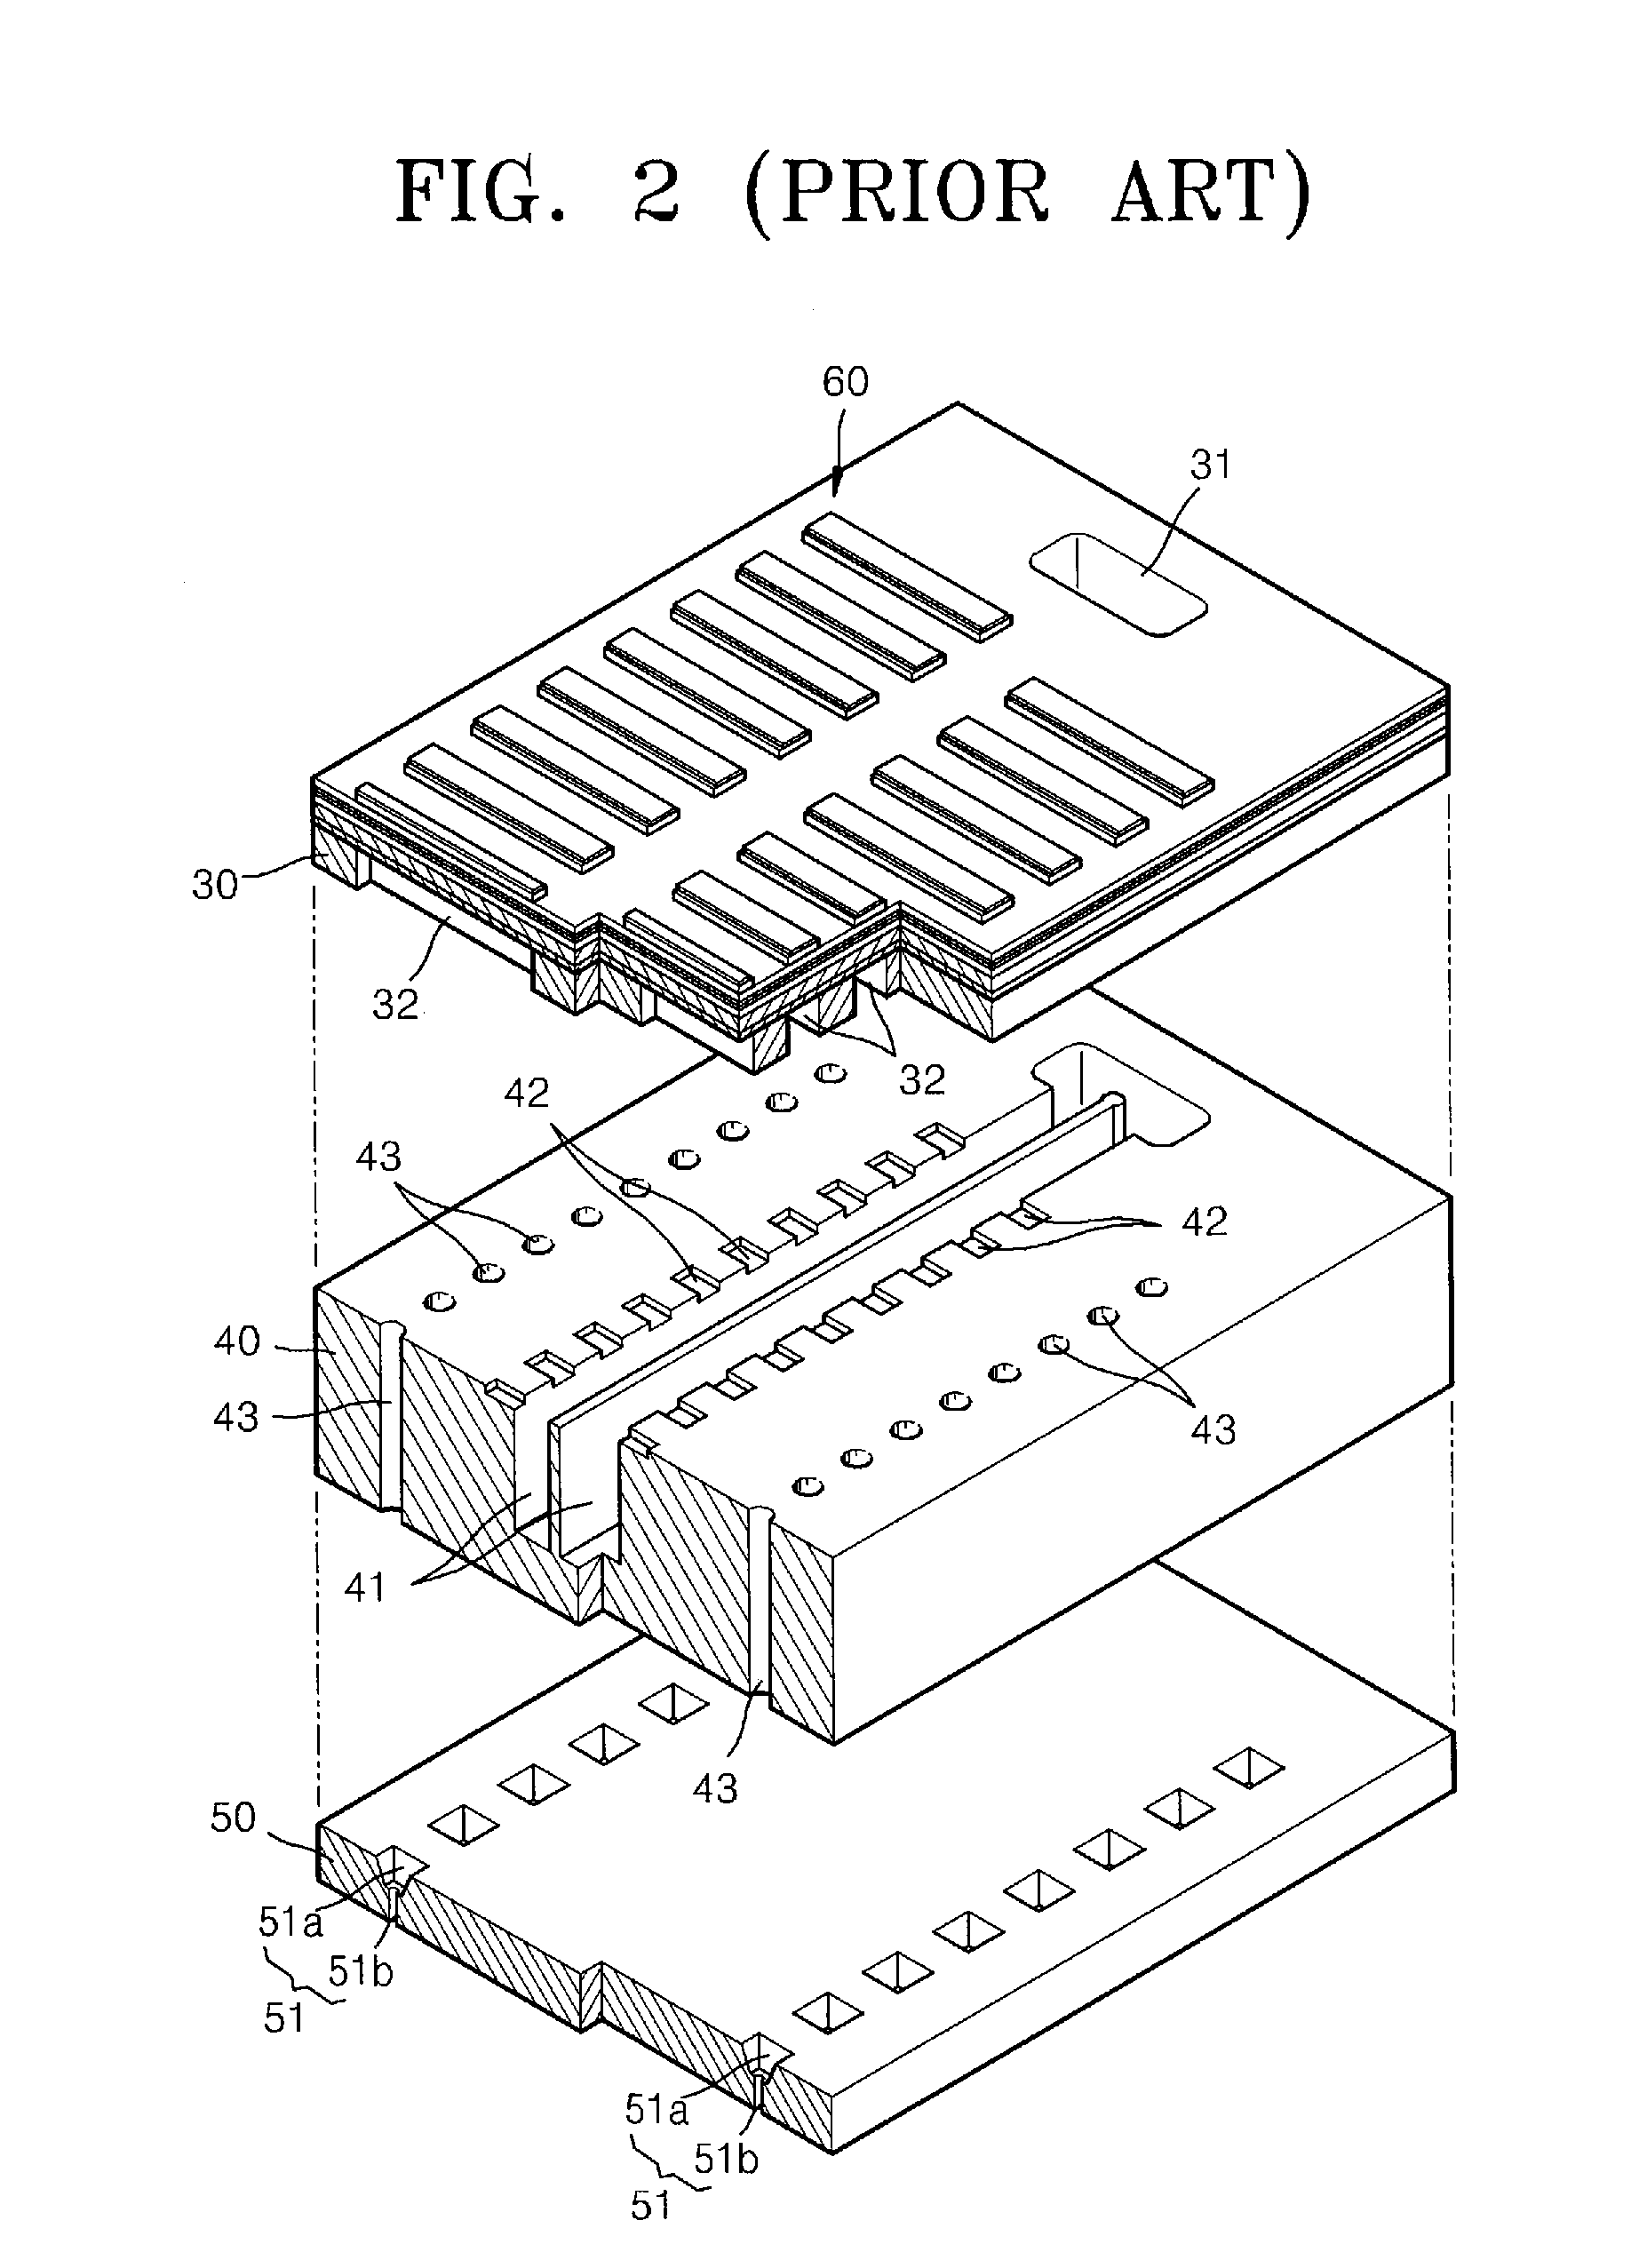 Piezoelectric inkjet printhead and method of manufacturing the same